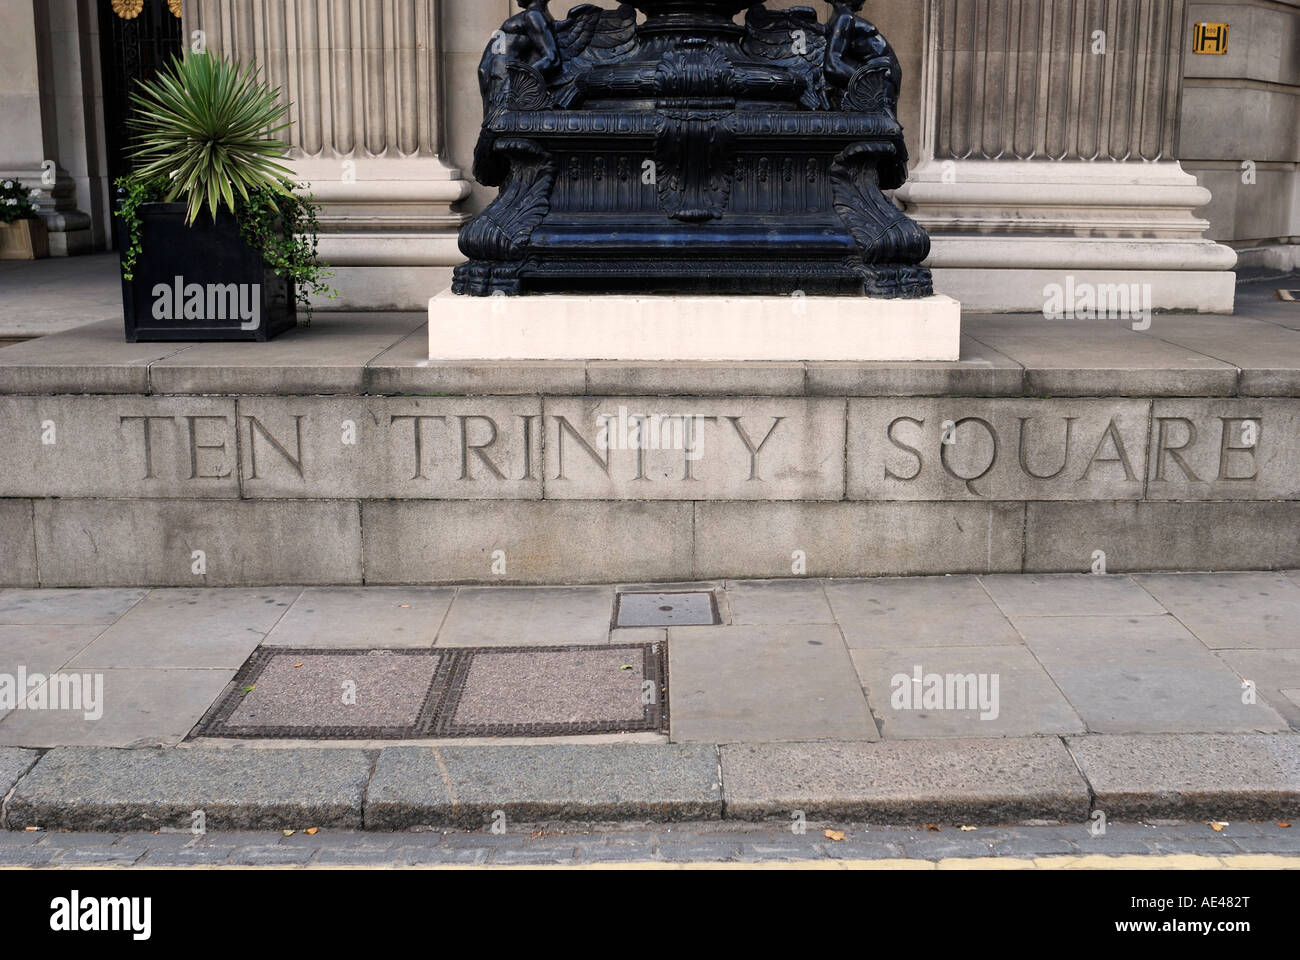 SIGN FOR NO 10 TRINITY SQUARE FORMER PORT OF LONDON AUTHORITY BUILDING LONDON ENGLAND Stock Photo